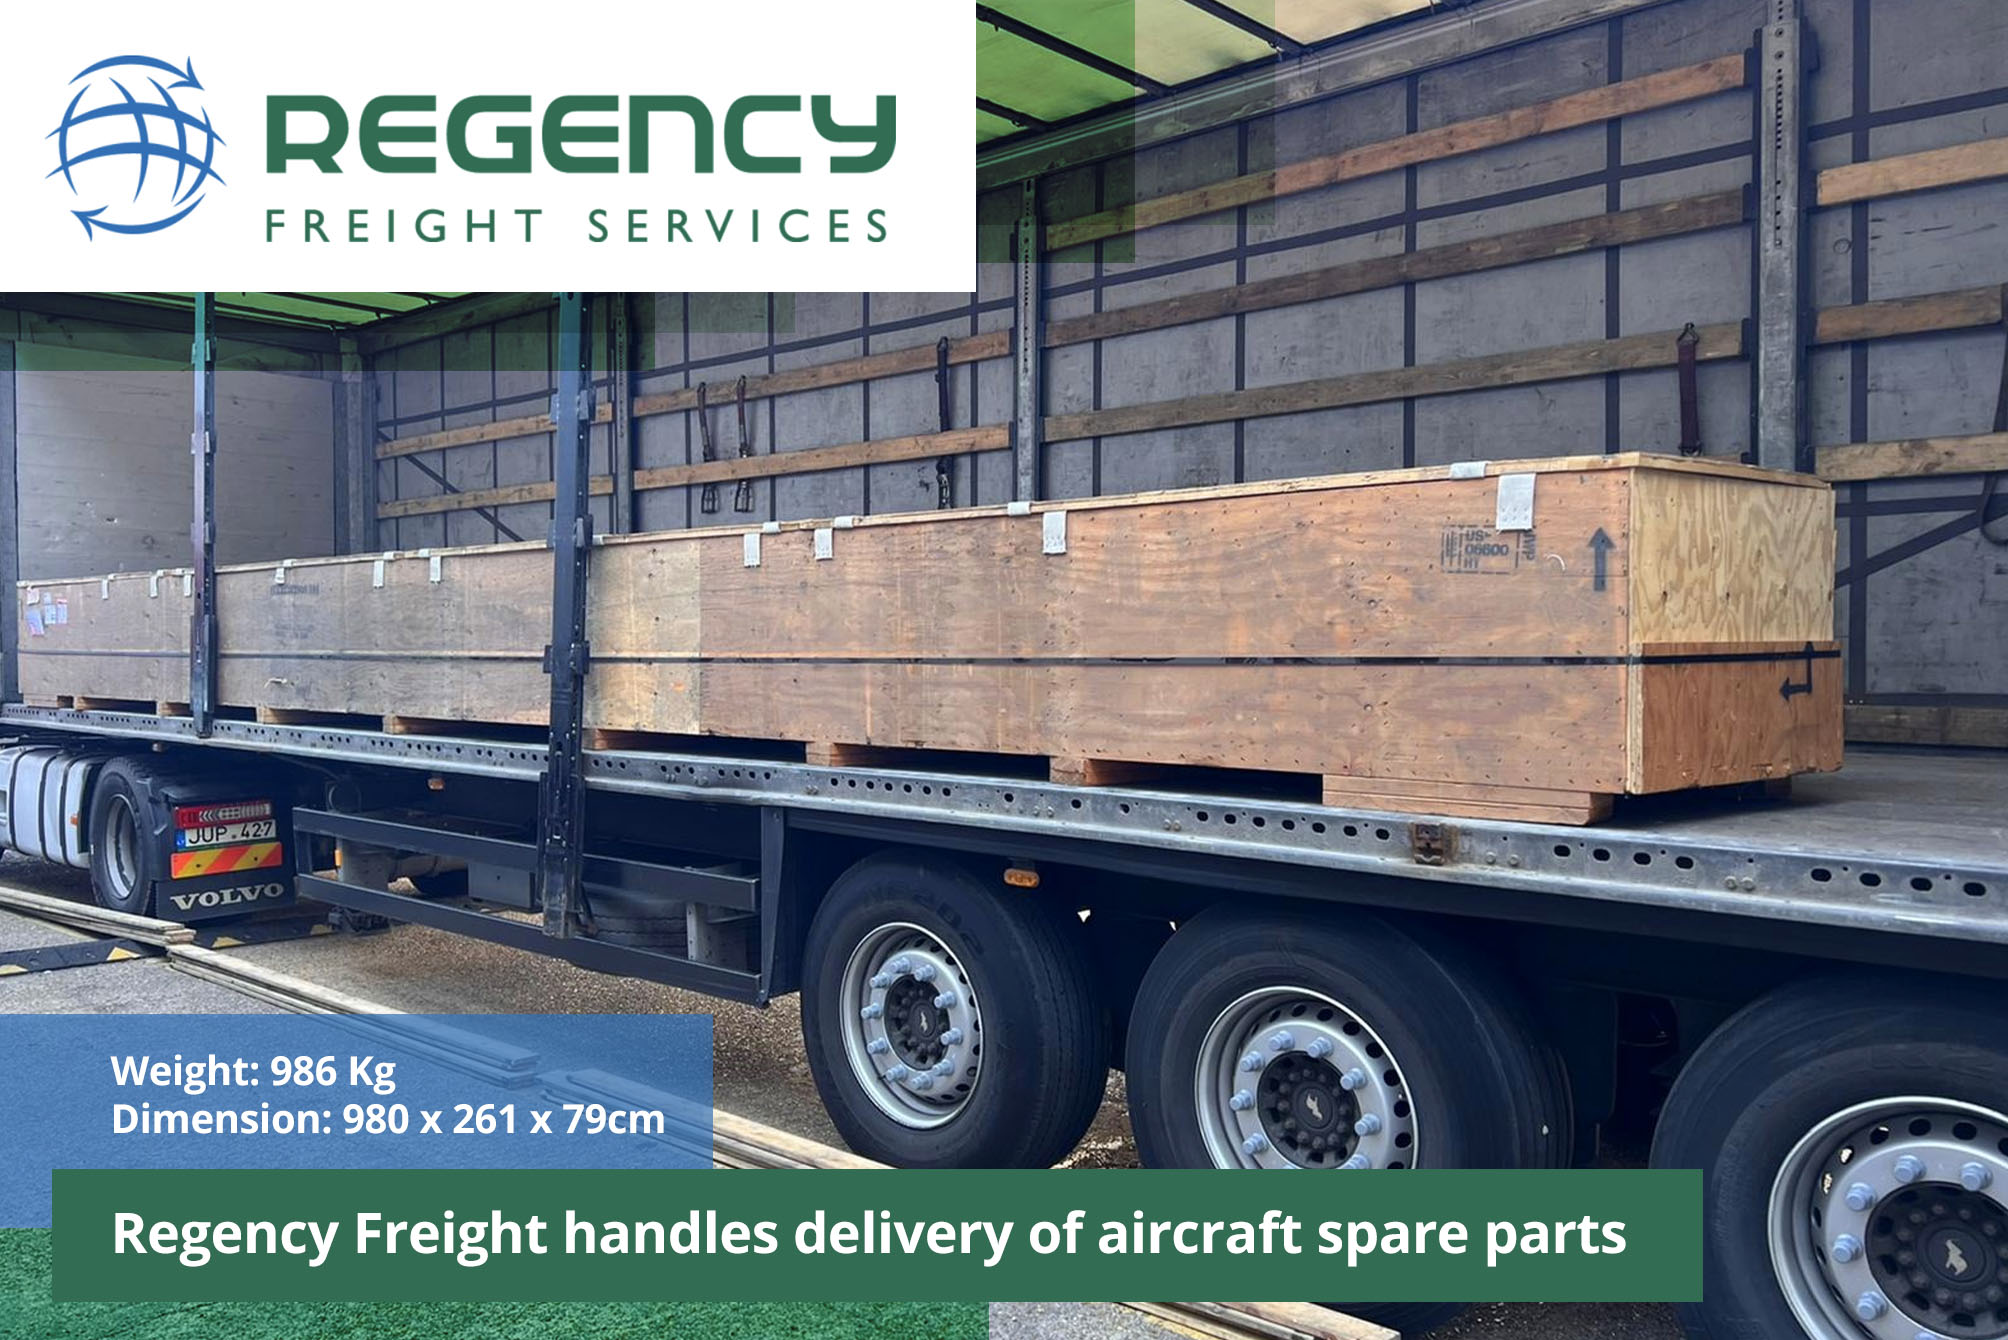 Regency Freight handles delivery of aircraft spare parts